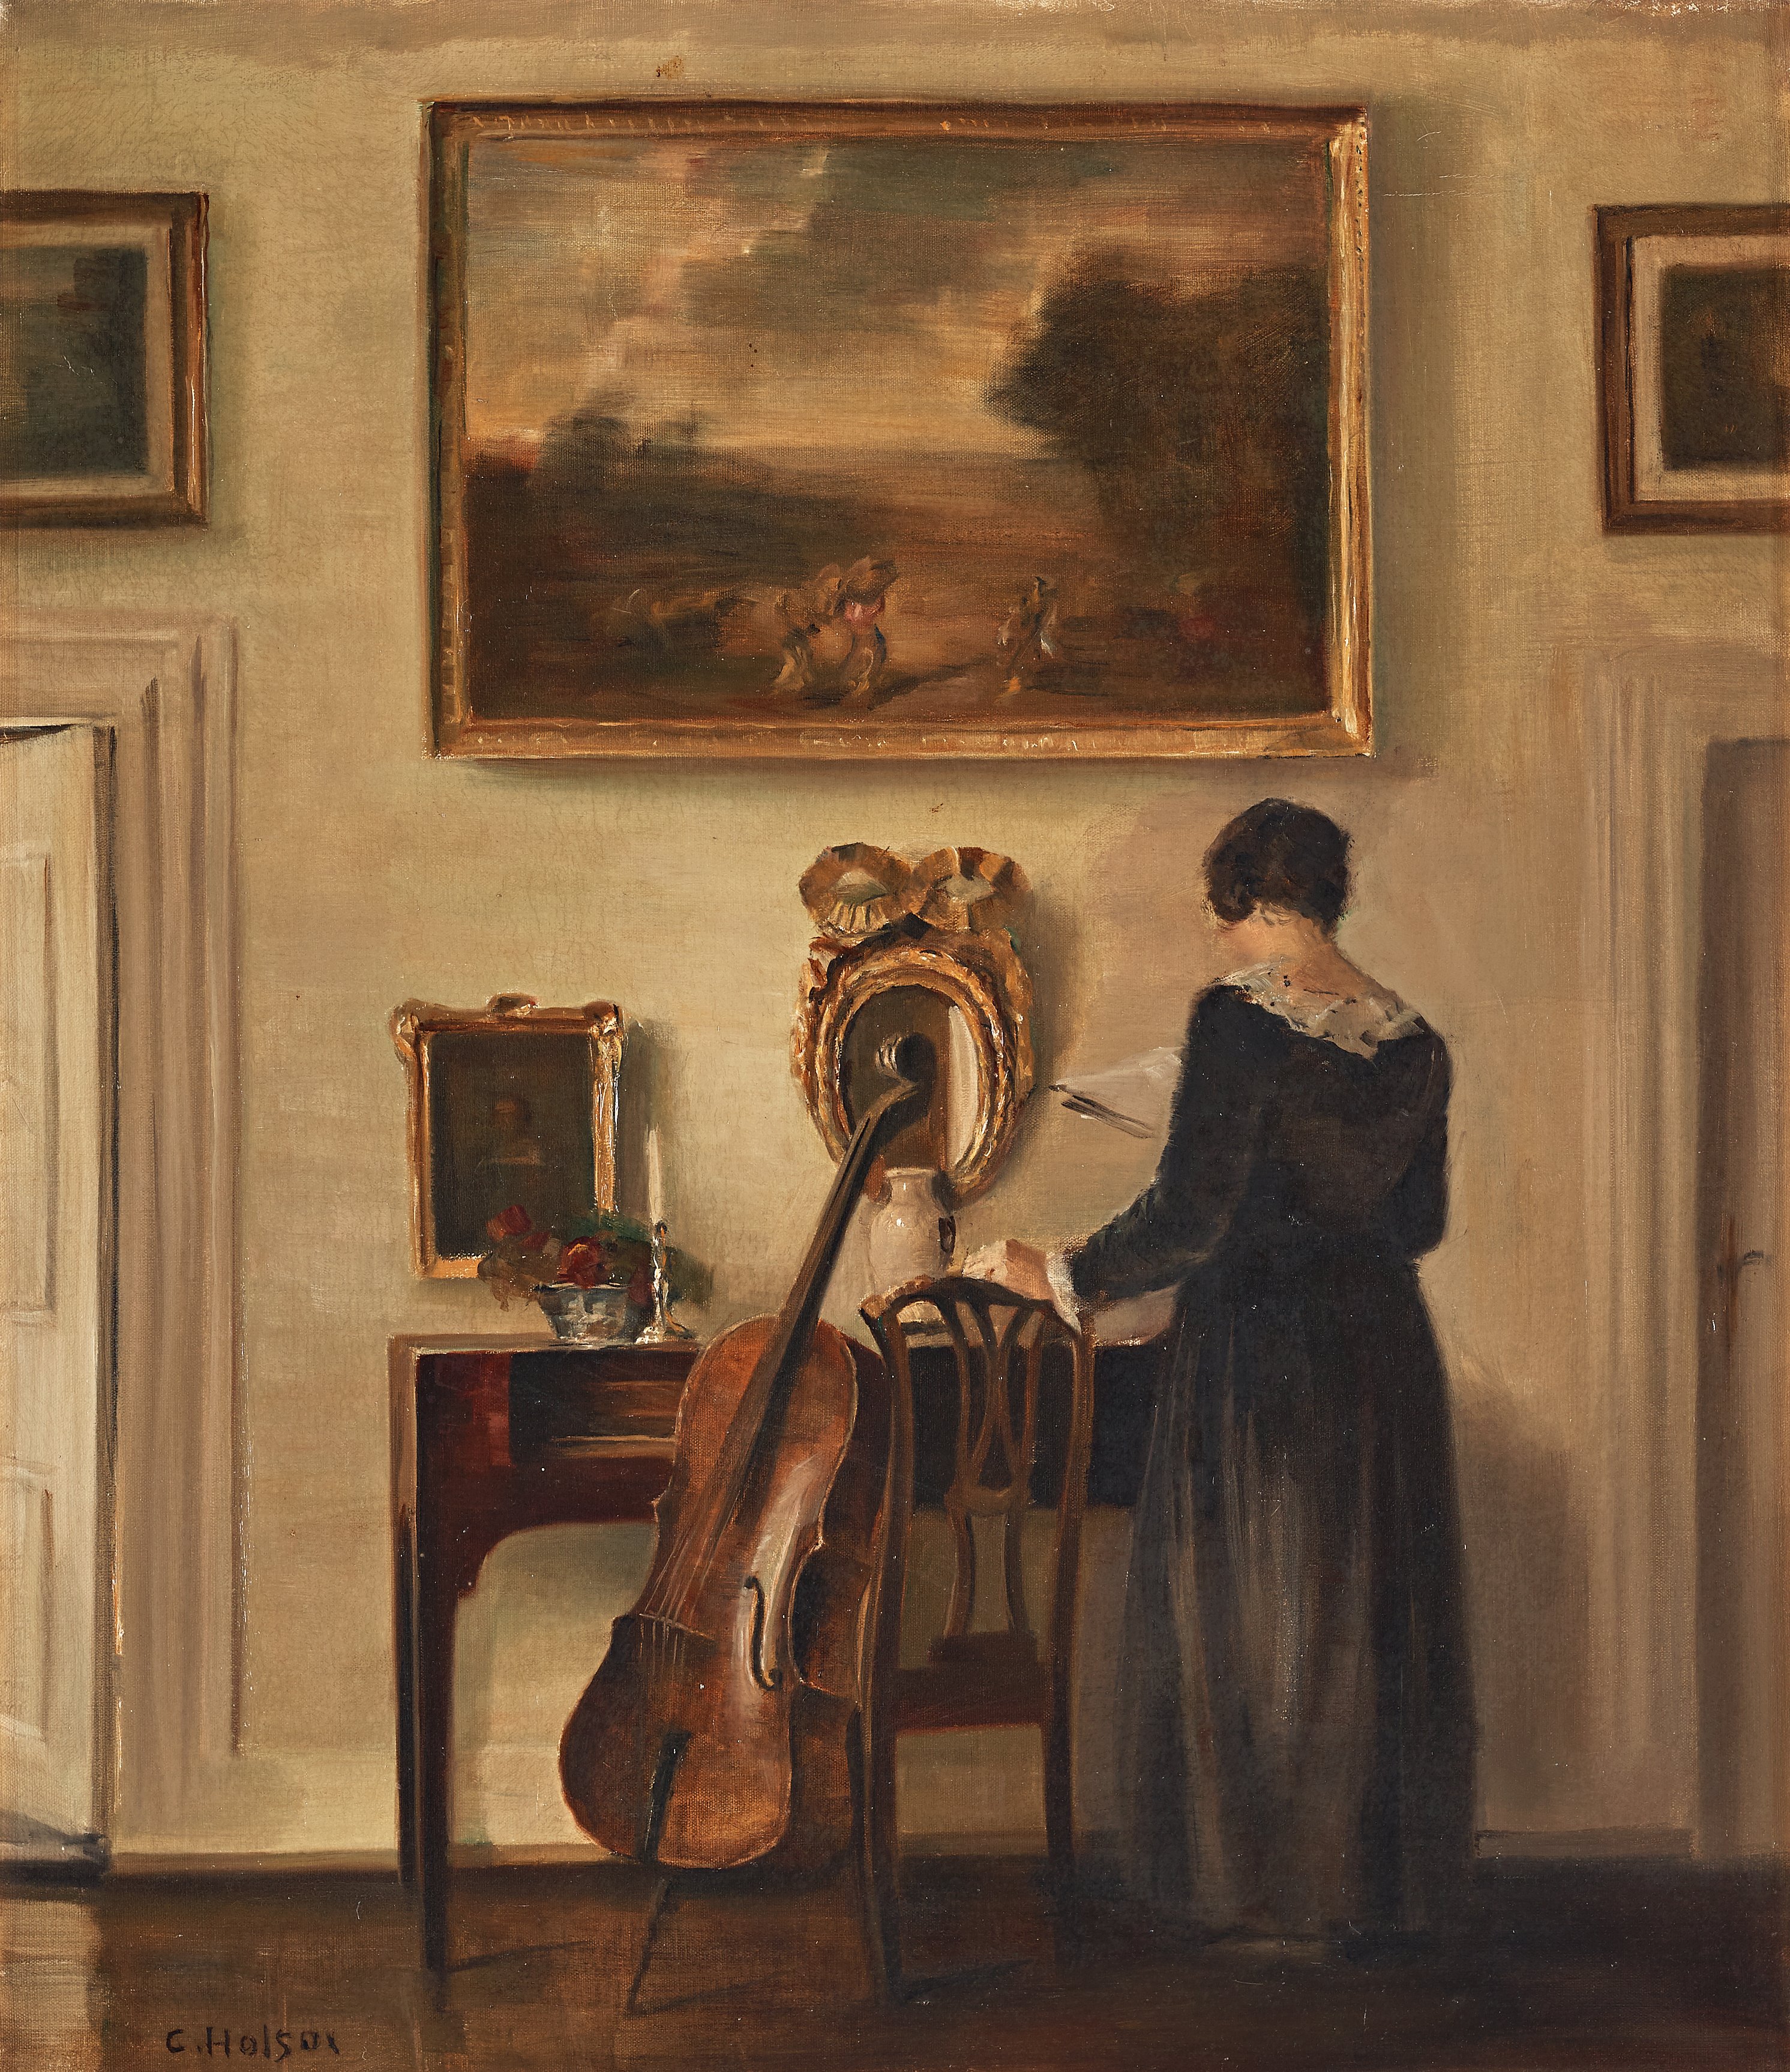 File:Carl Holsøe, Interior with woman and cello.jpg - Wikimedia